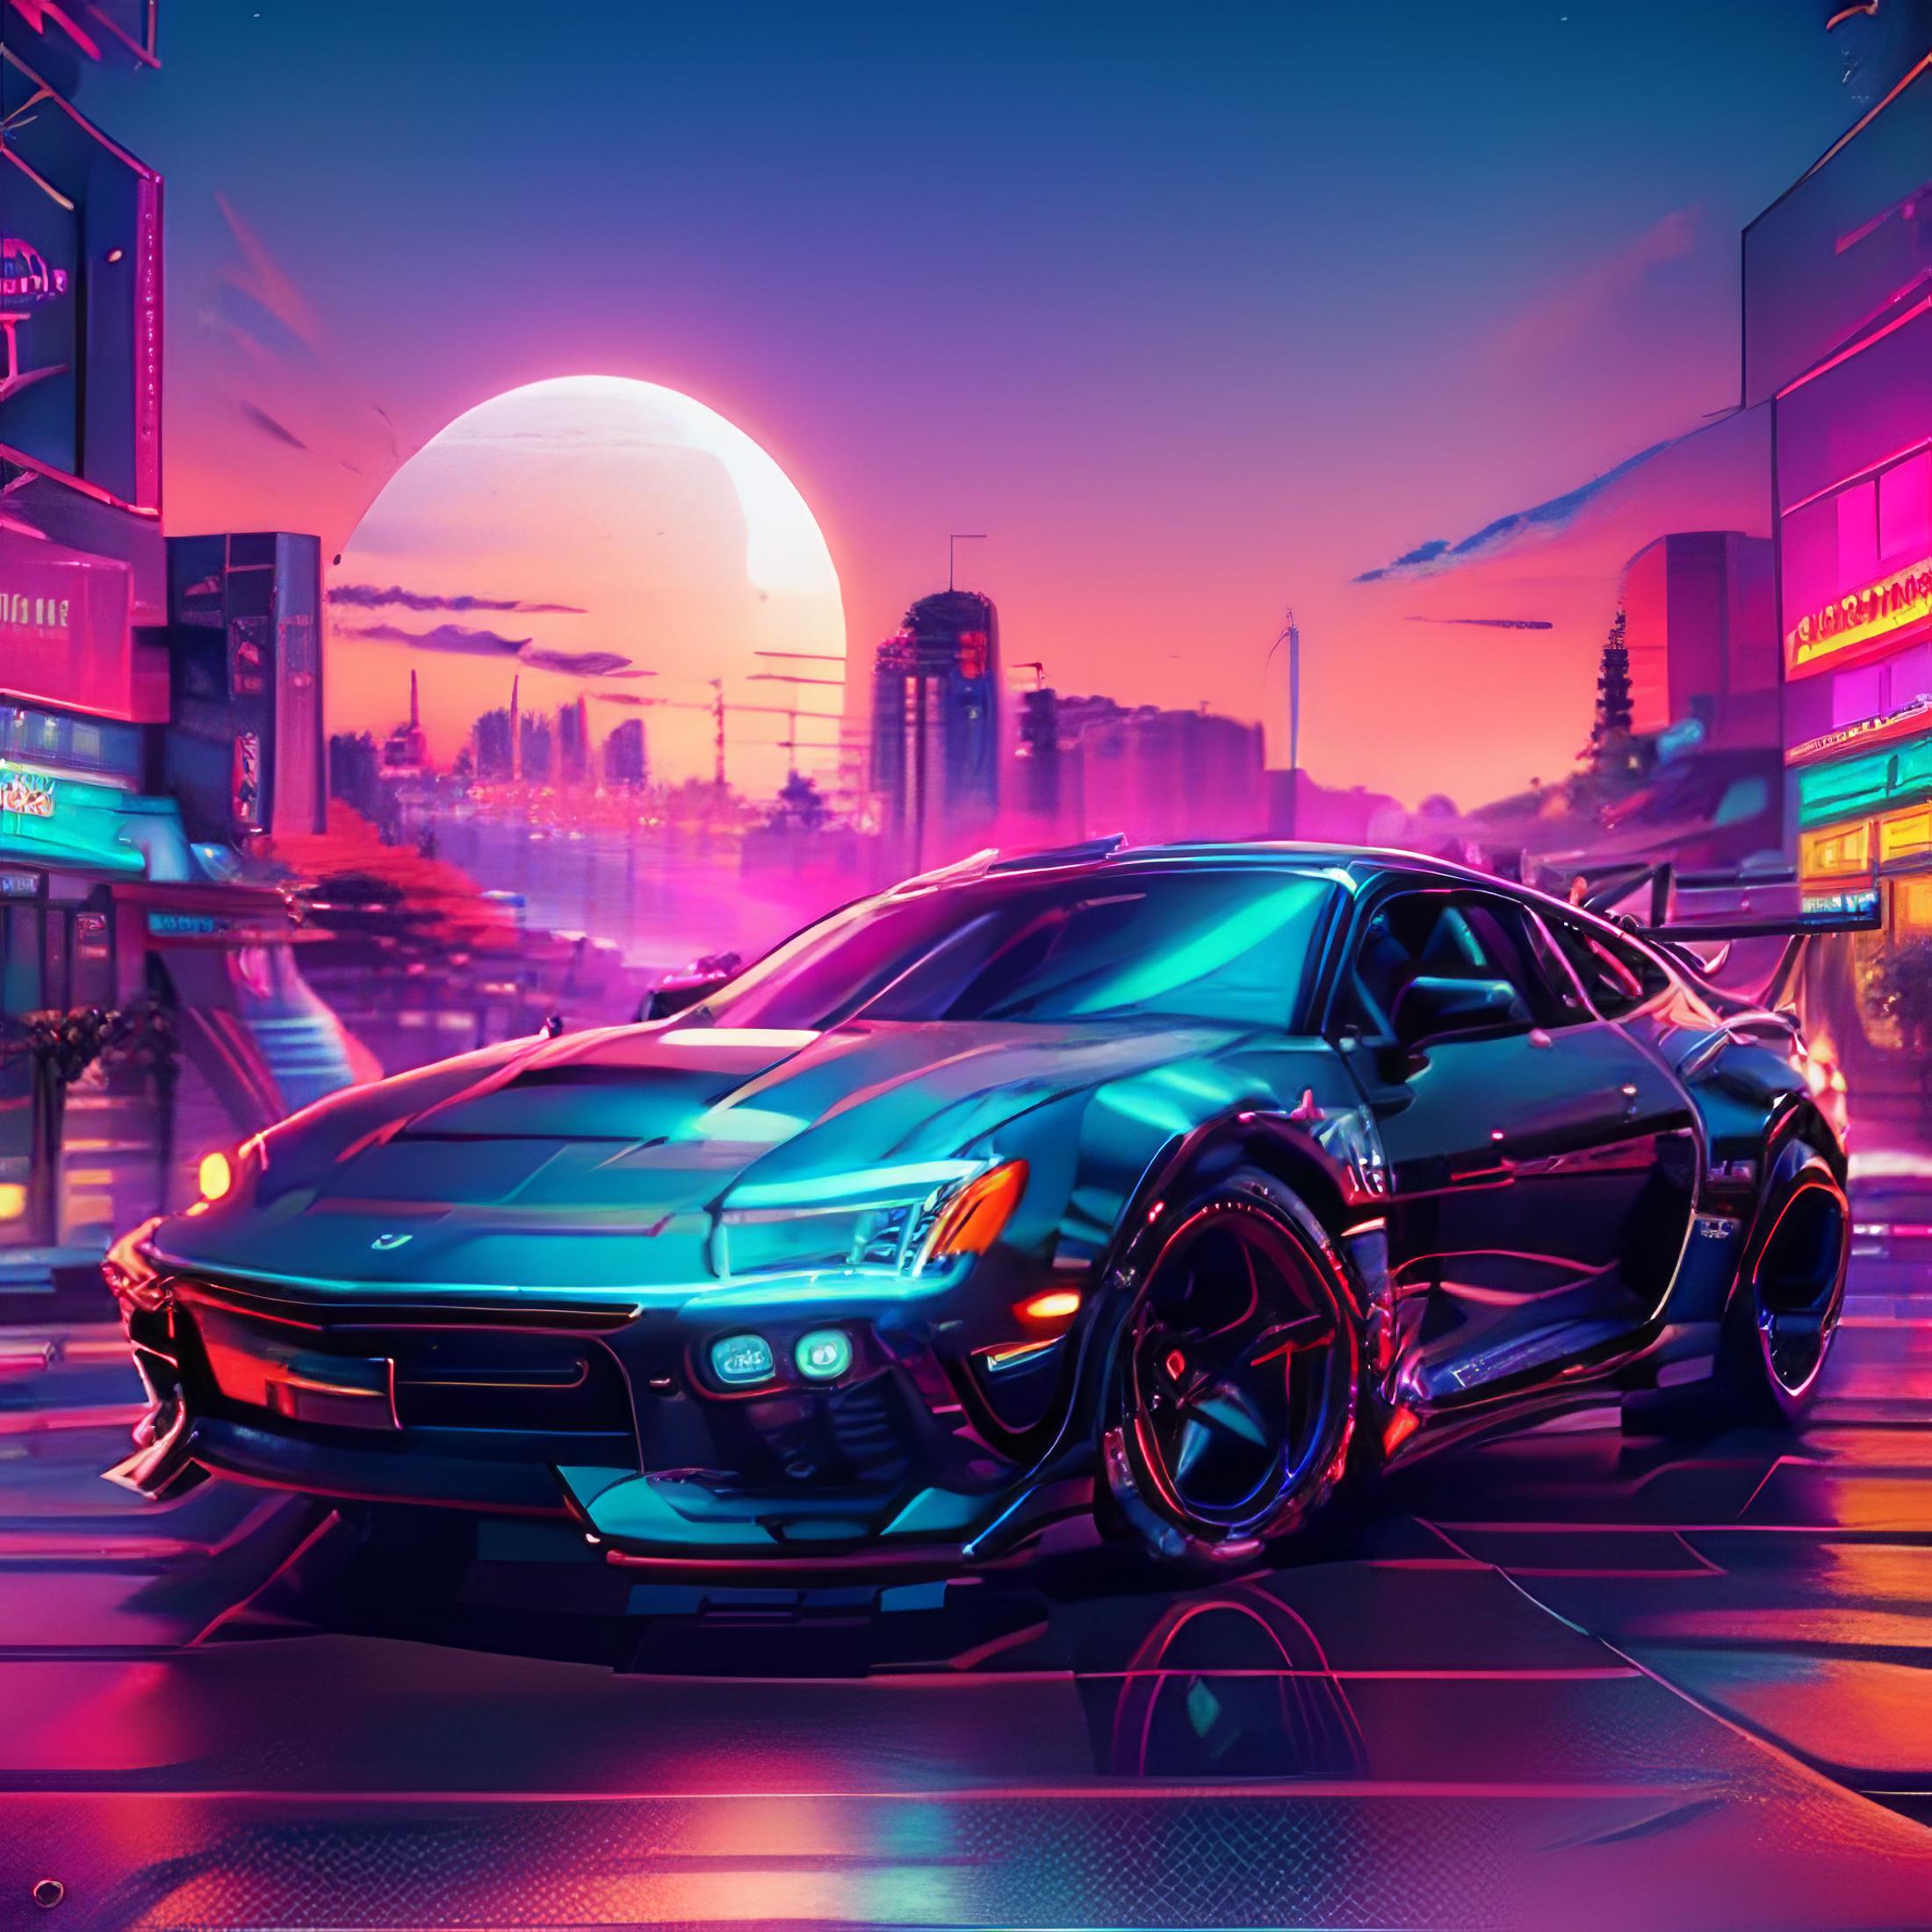 Synthwave 1983 - Style - by YeiyeiArt image by CaptainMorgan77